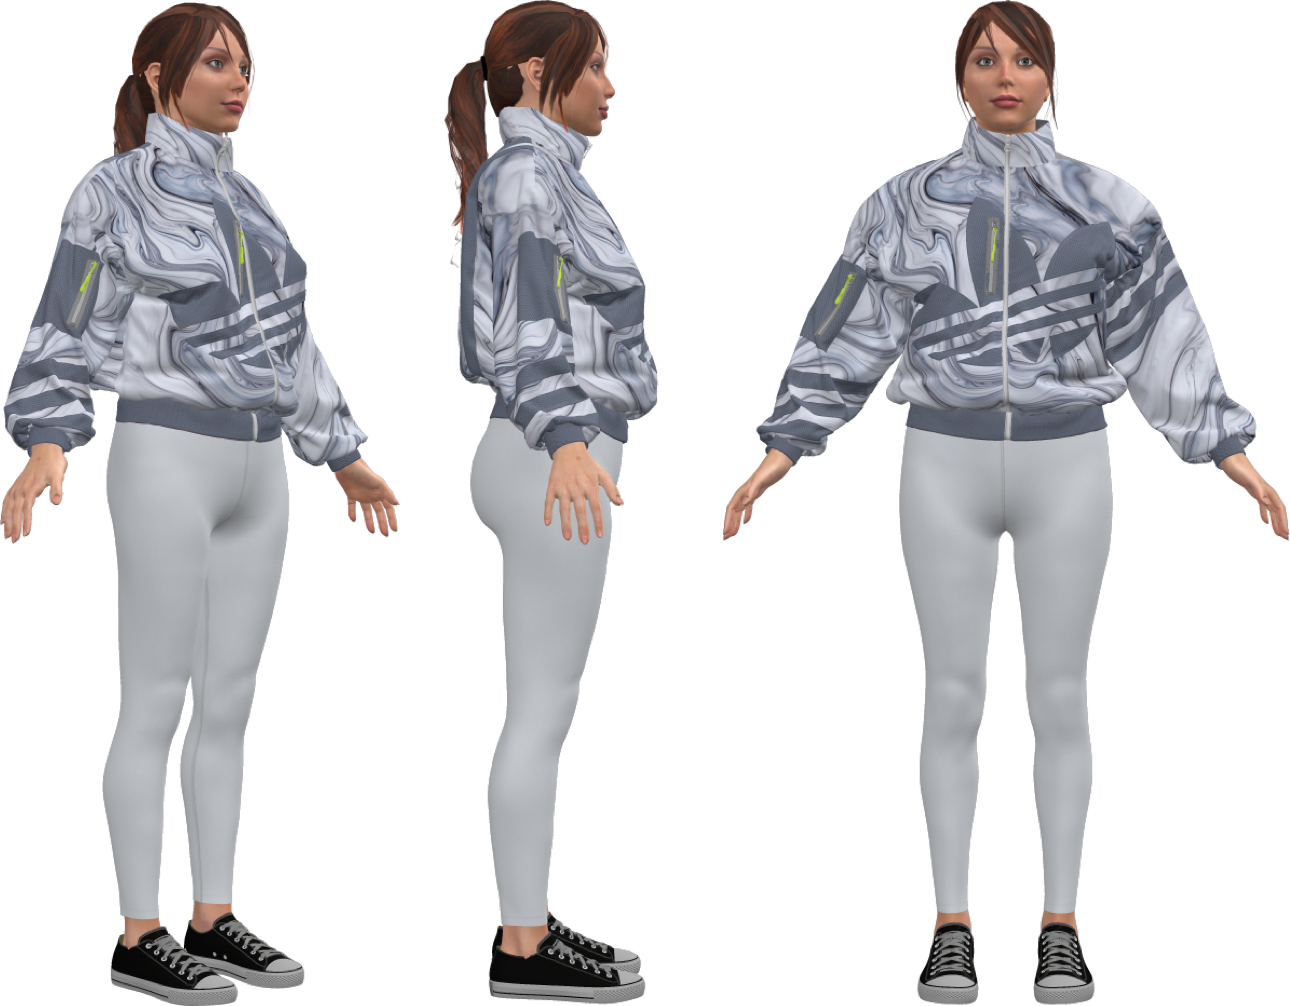 Digital 3D Product Final Renders of the jumpsuit. Displayed is side, front, and angle view.